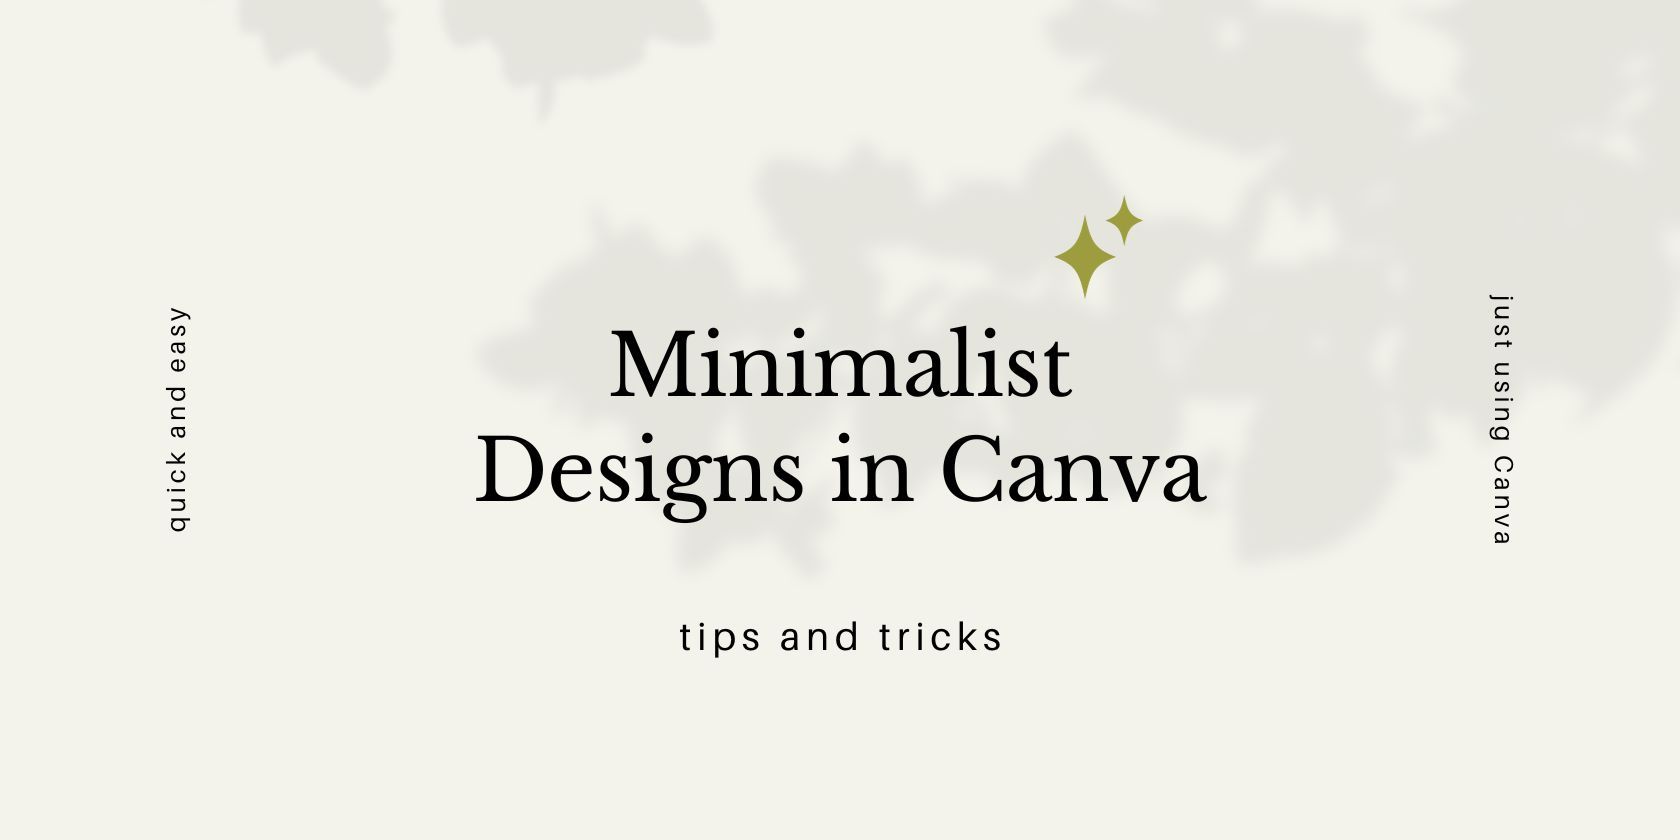 Minimalist Design in Canva text in centre of page, with tips and tricks below it on a beige background.